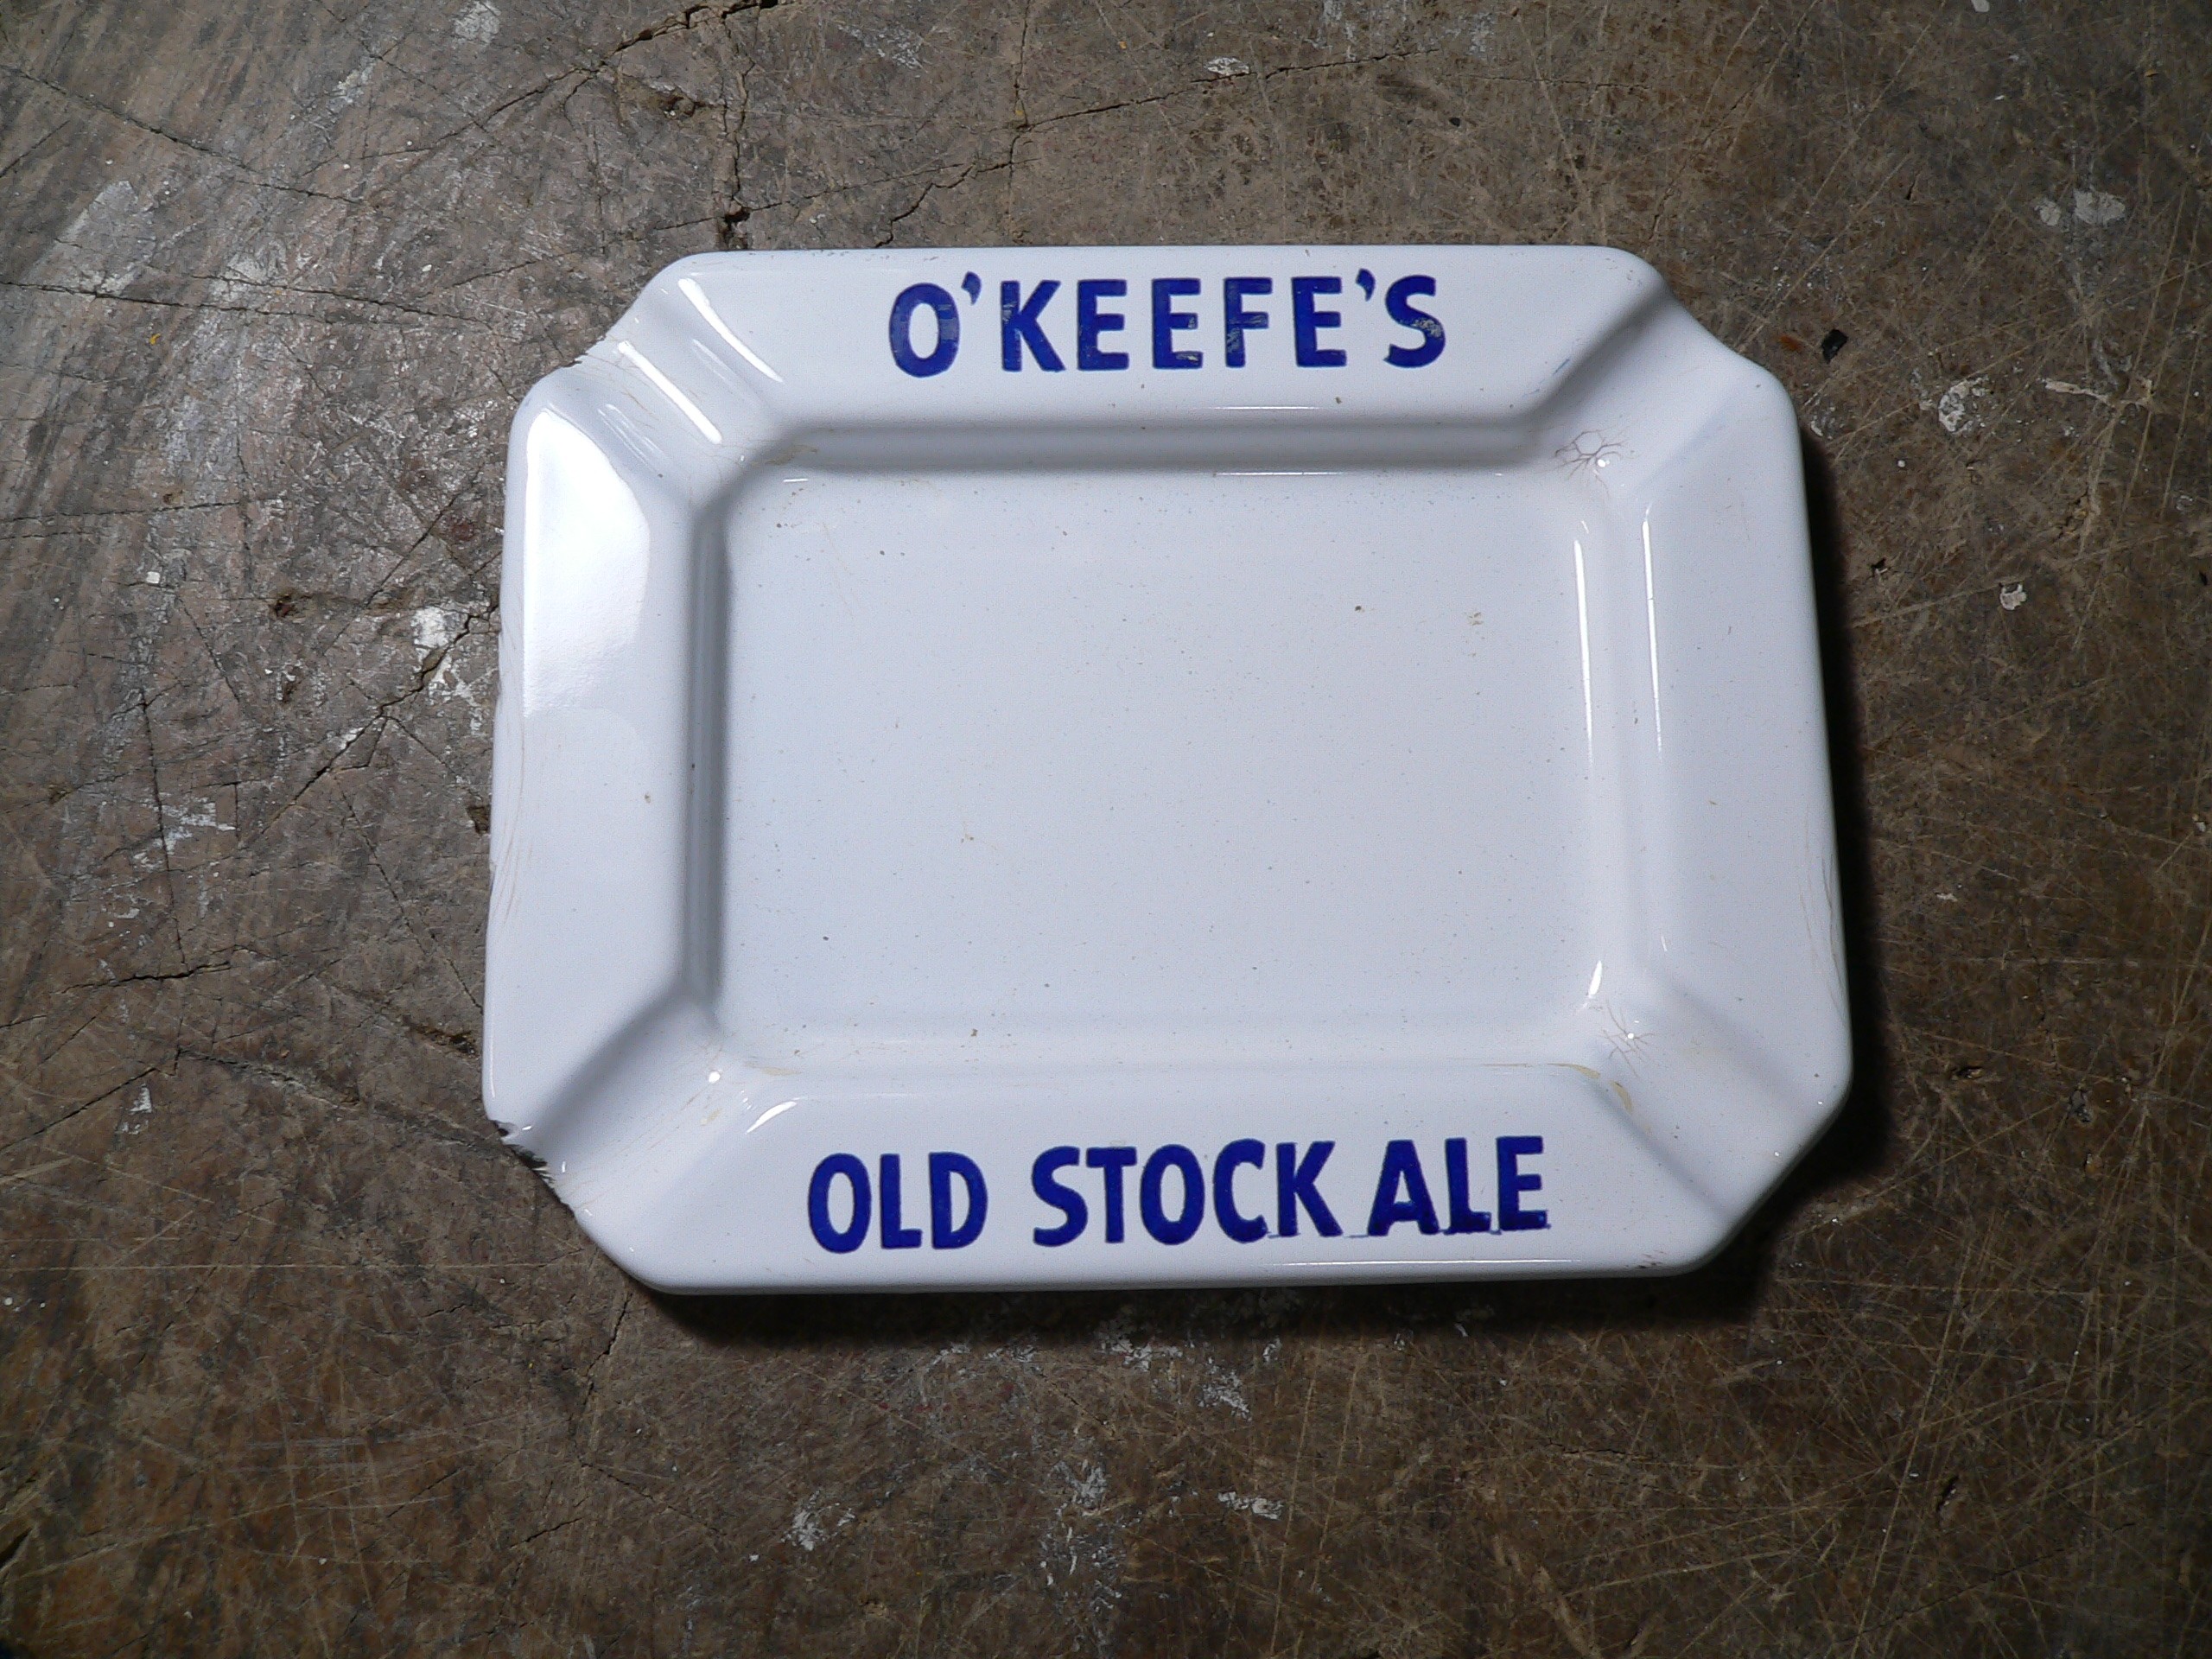 cendrier antique Okeefes old stock ale # 8974